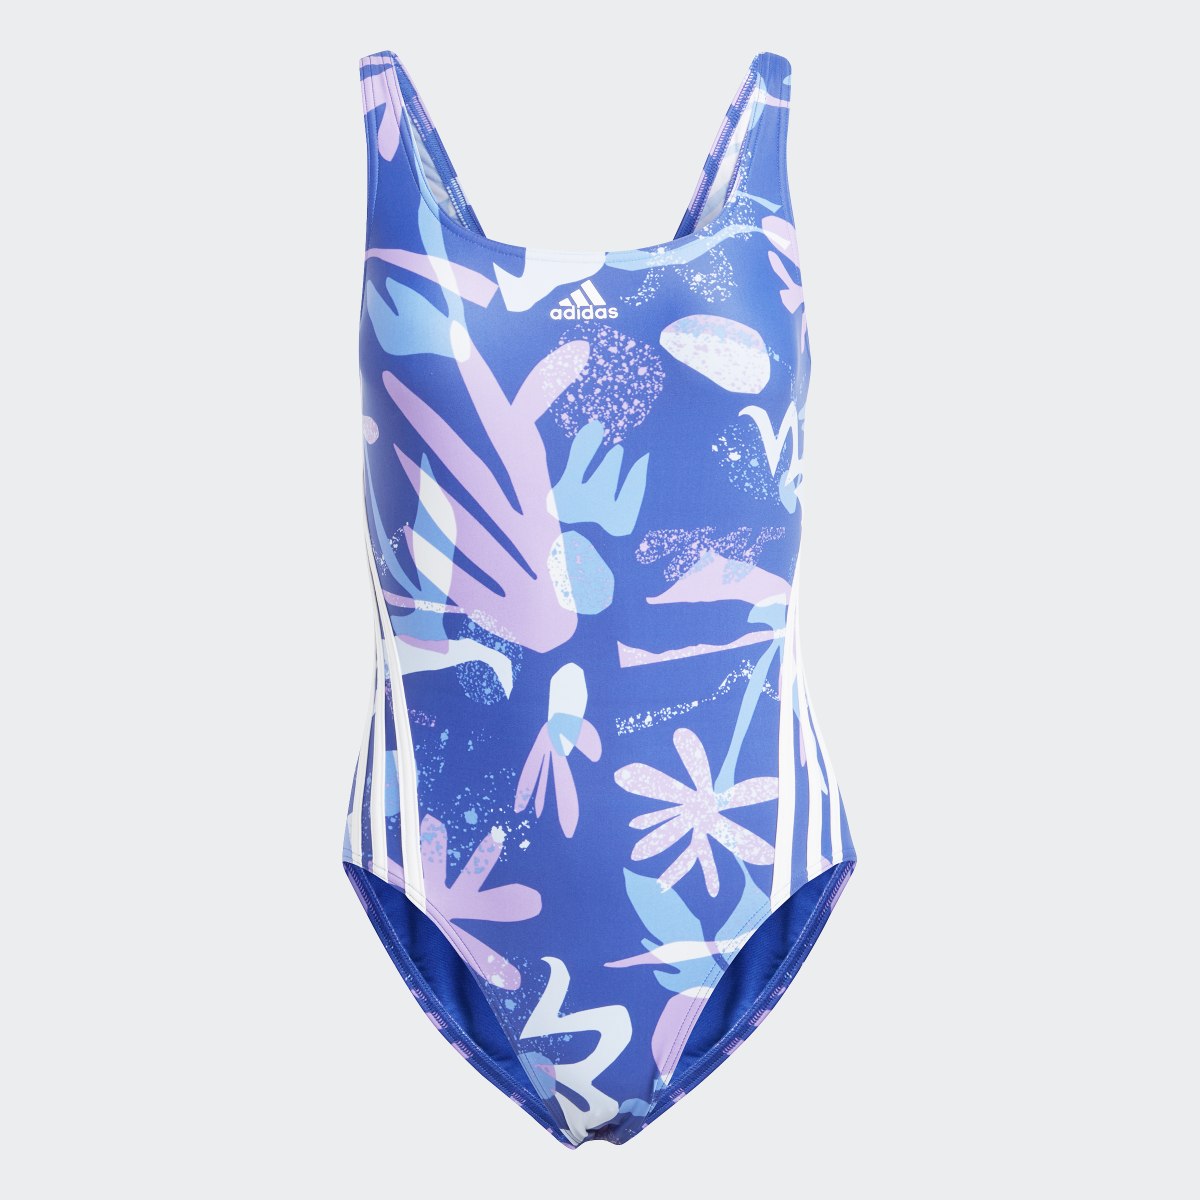 Adidas Floral 3-Stripes Swimsuit. 5